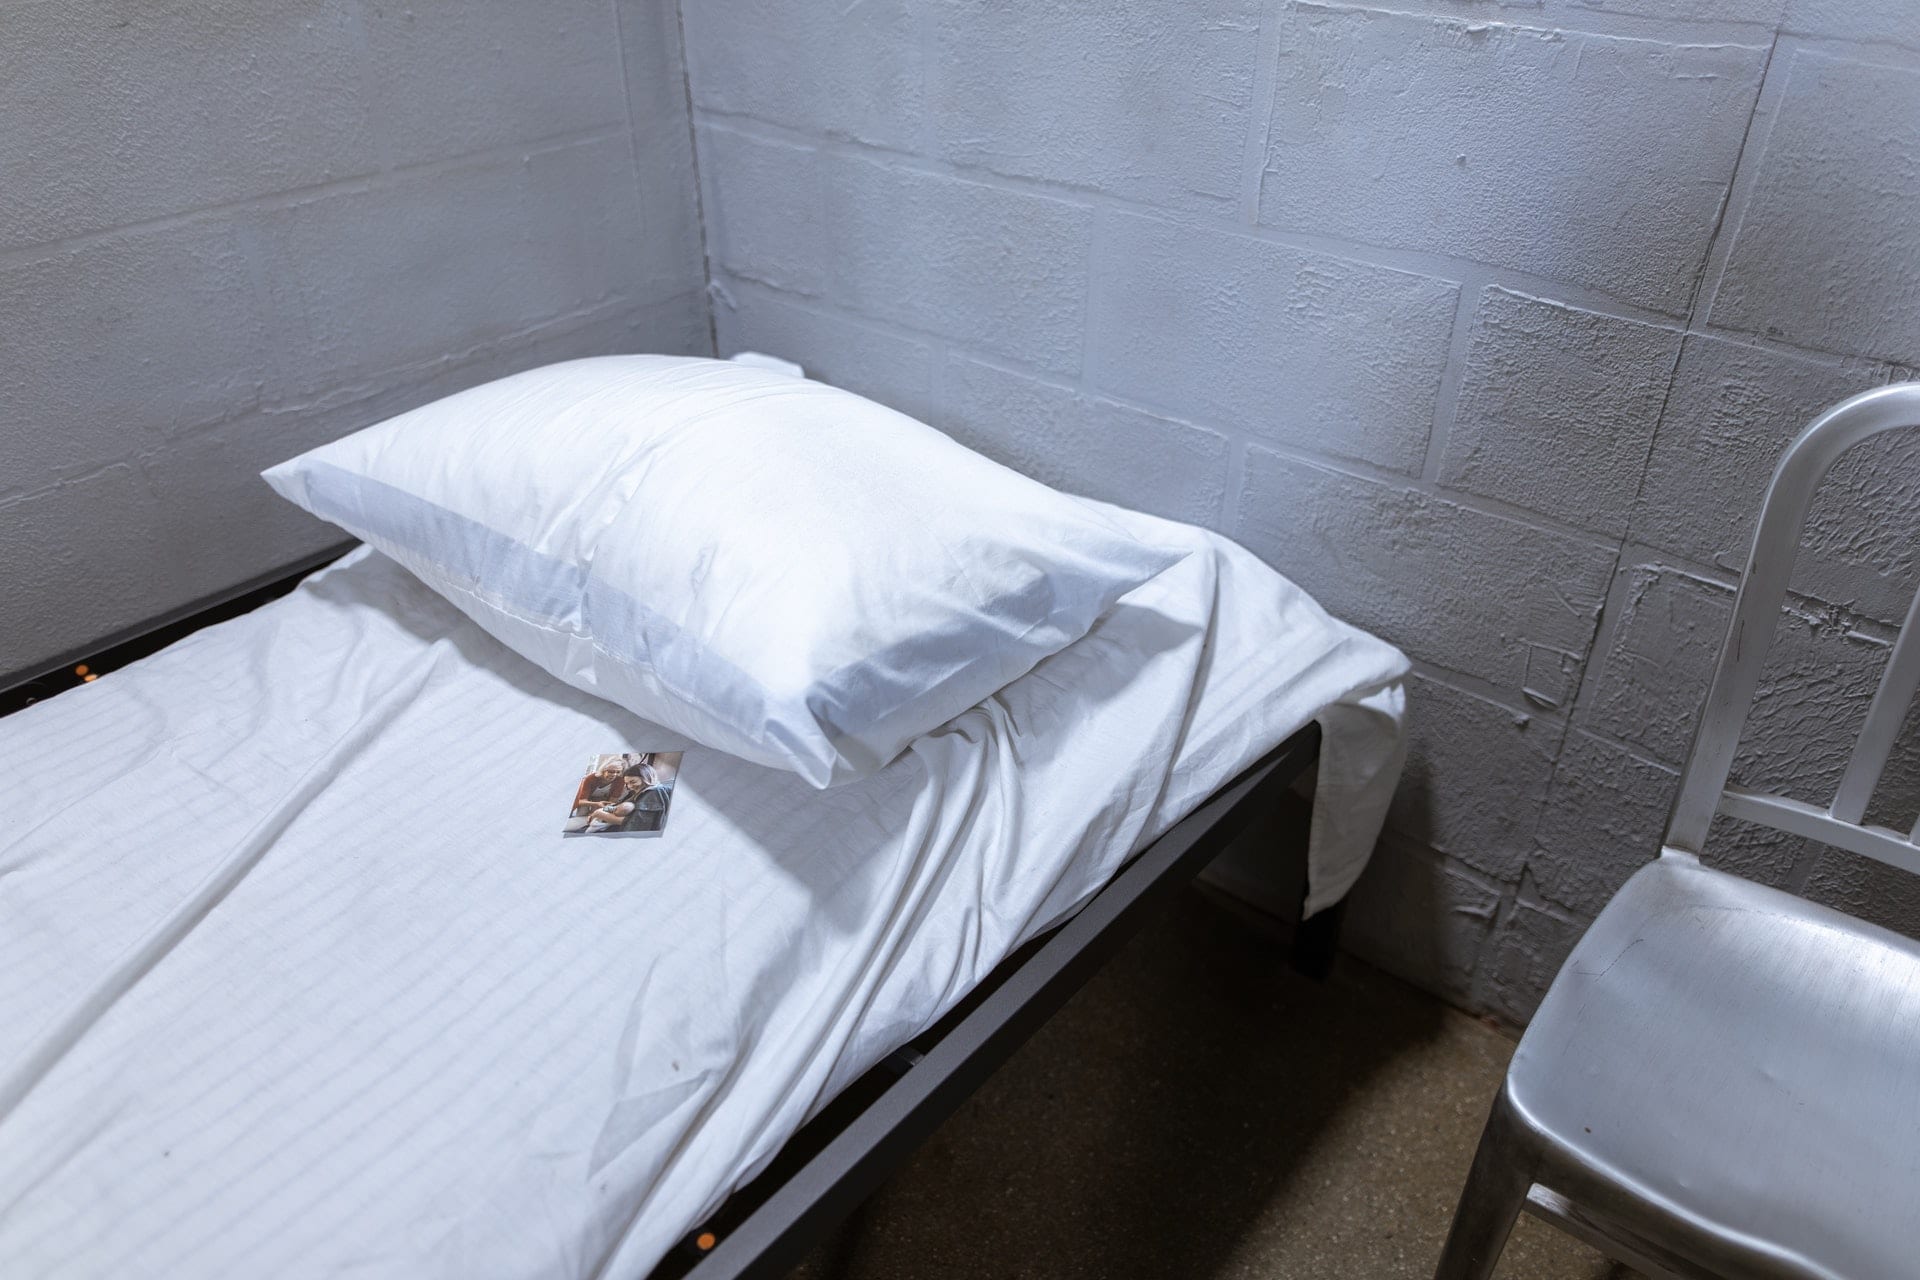 What Can You Do to Improve Your Loved One’s Living Conditions in Prison?